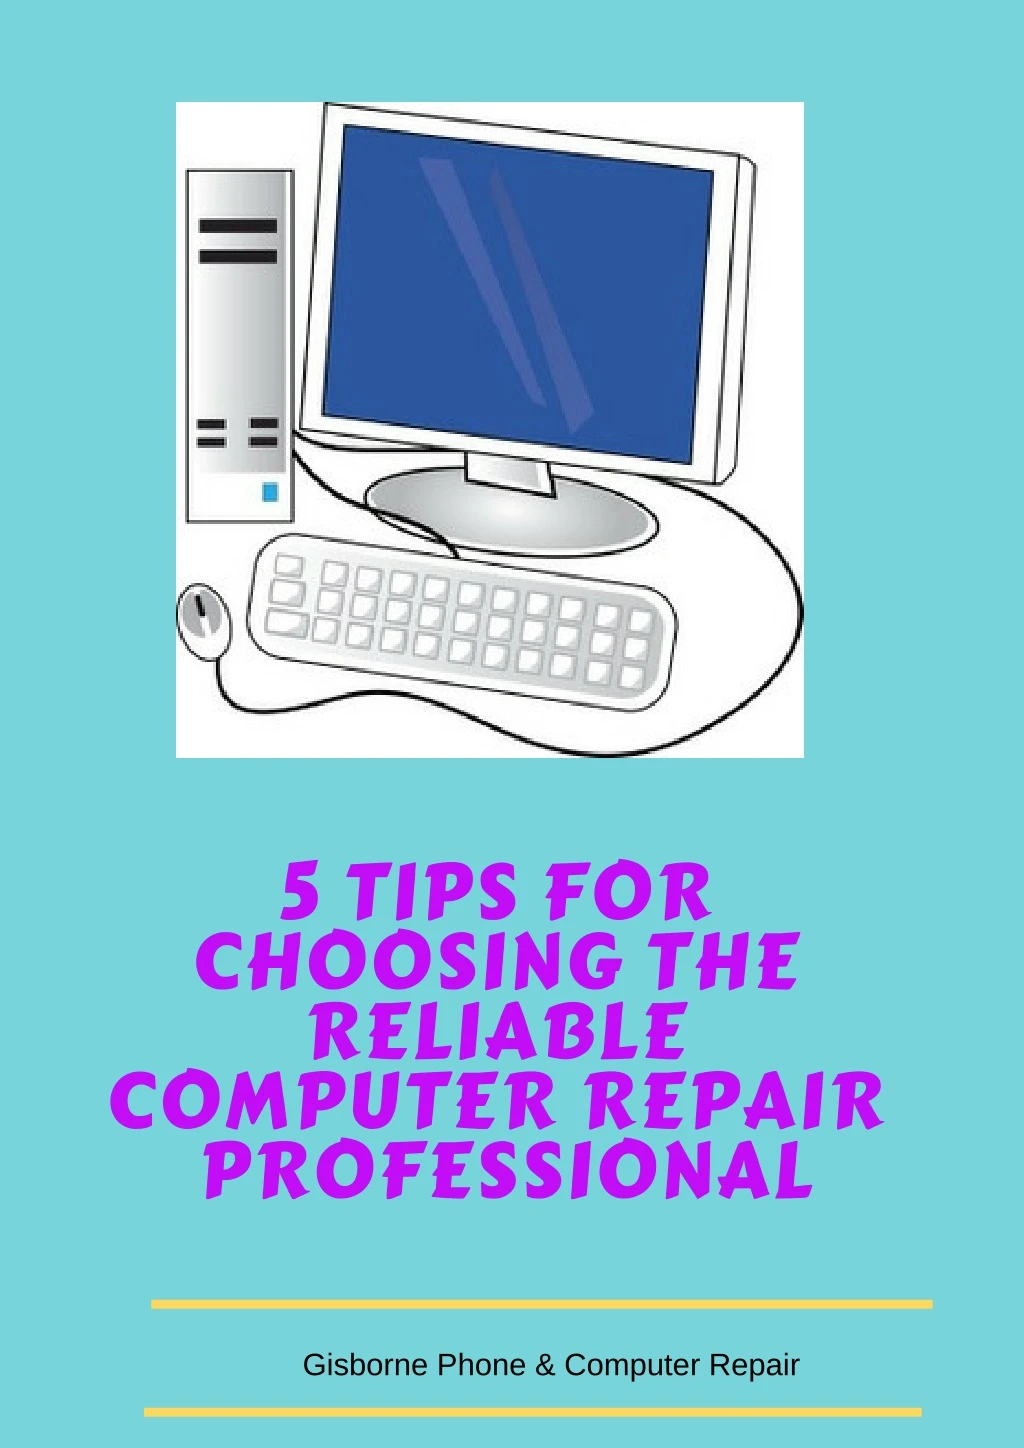 5 tips for choosing the reliable computer repair